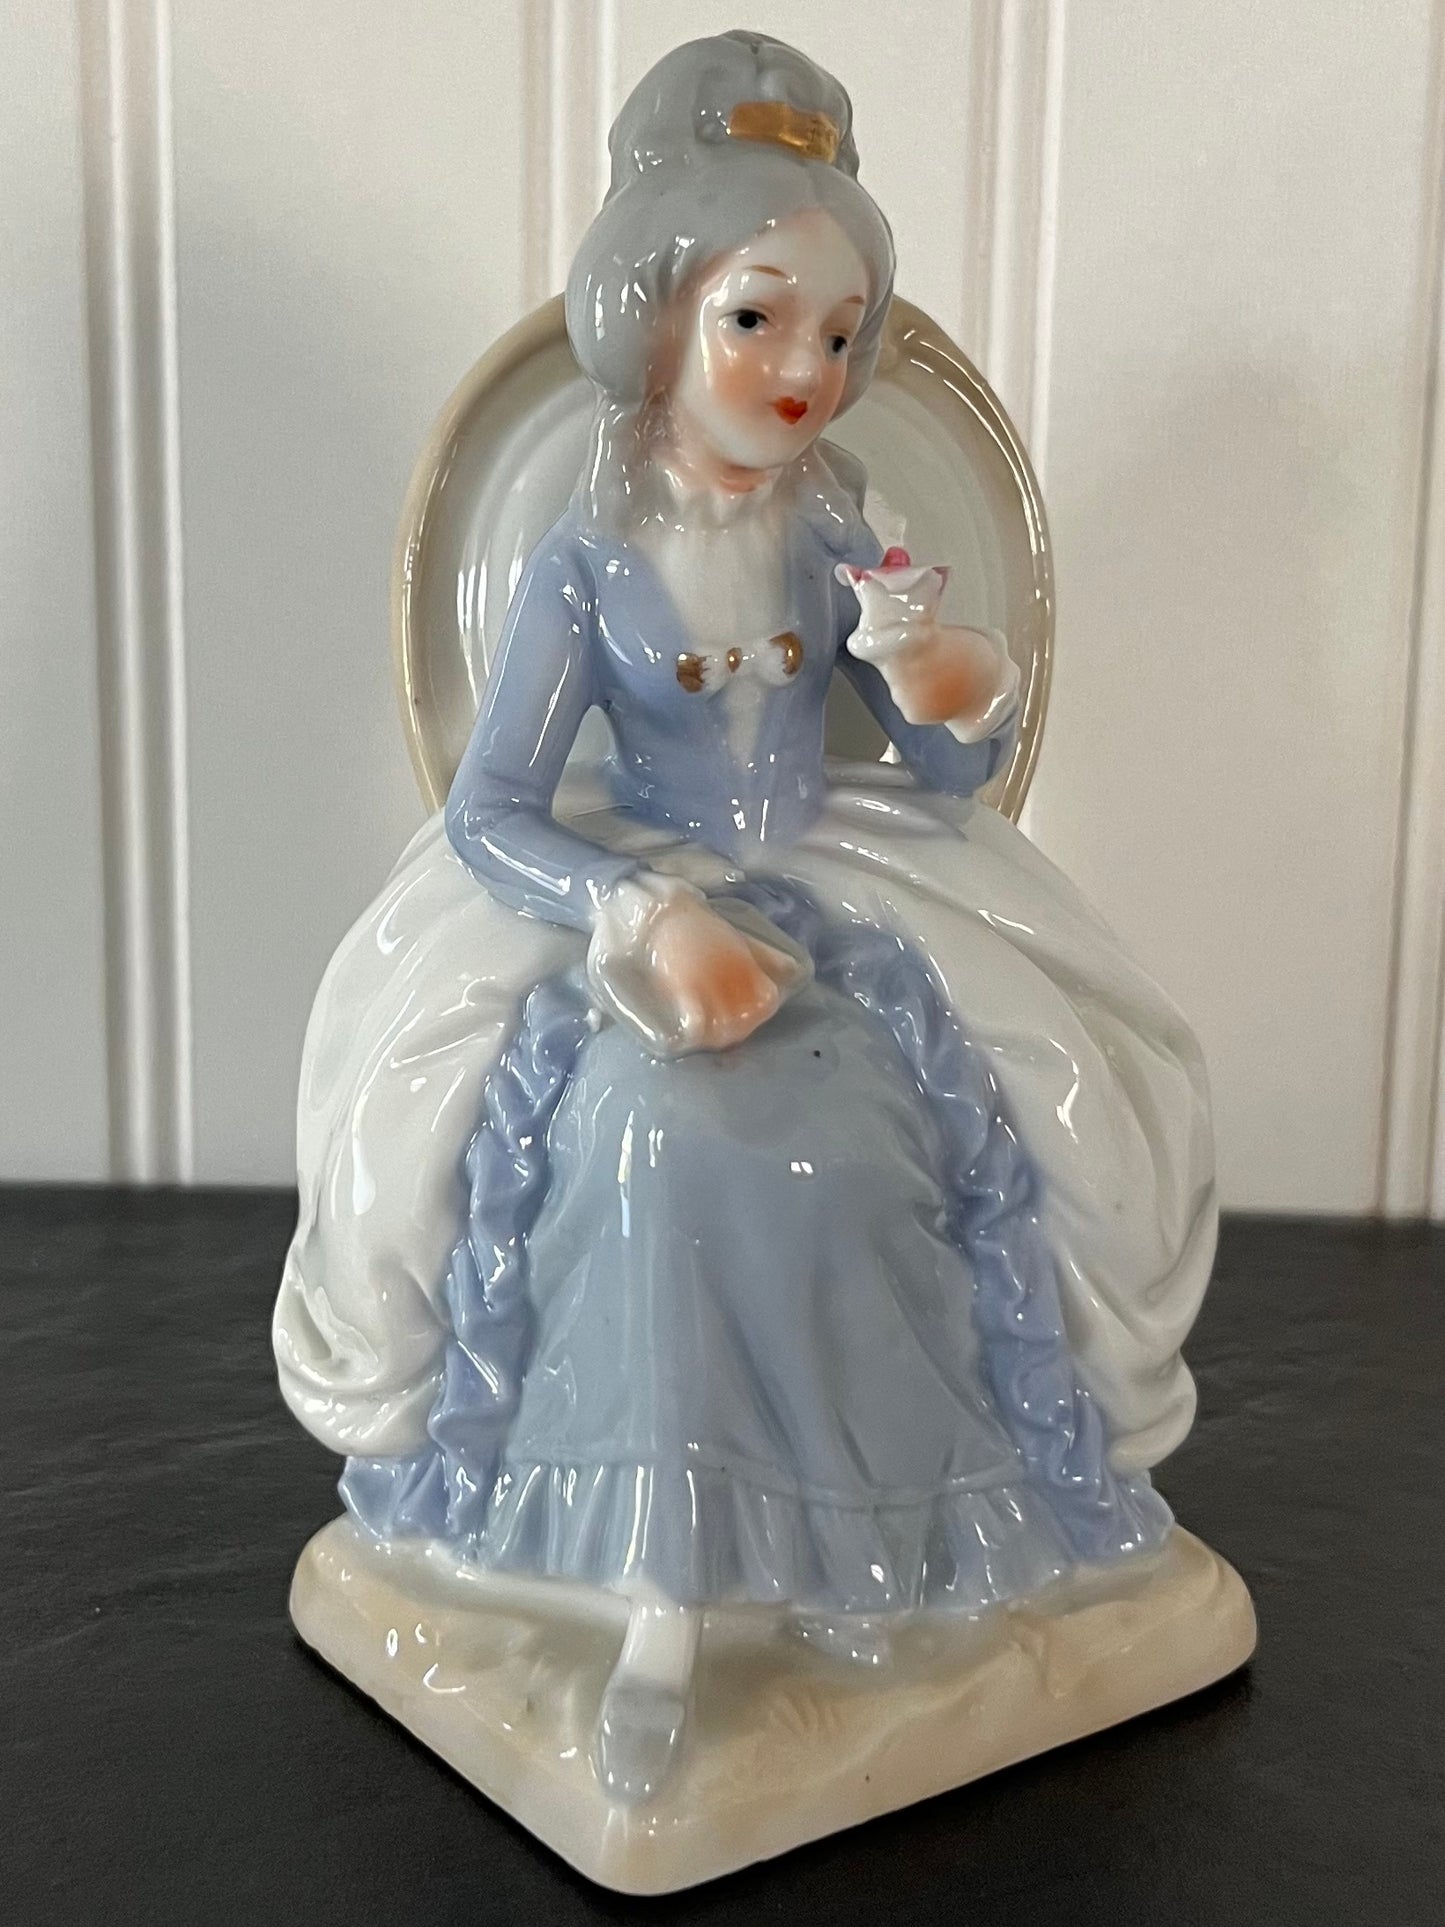 Vintage Blue and White French Provincial Colonial Regency Ceramic Porcelain Figurines - Gentleman and Lady Set